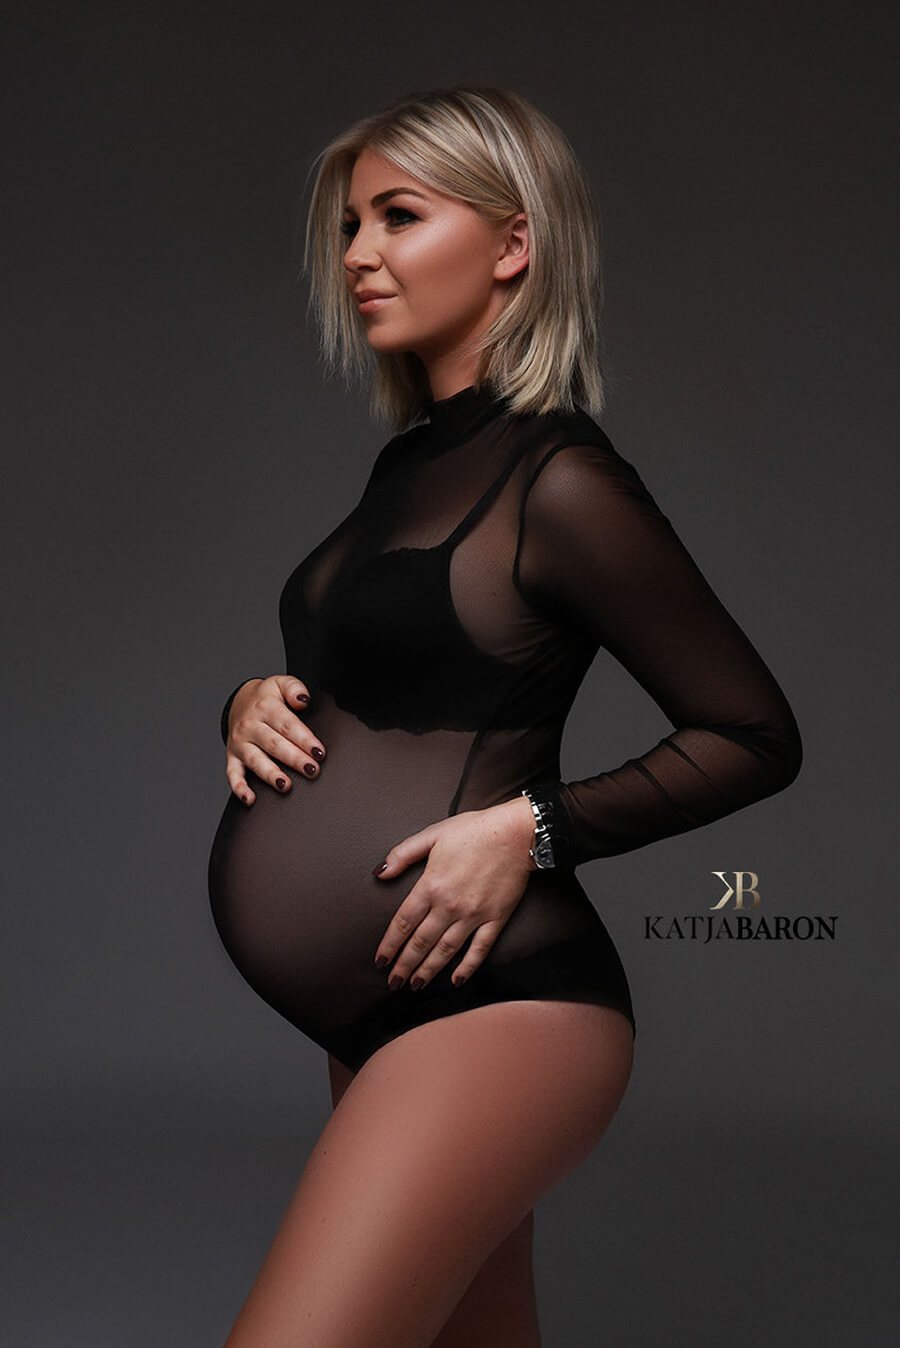 Black Diamand Maternity Bodysuit for Photoshoot, 2 Piece Maternity Bodysuit,  Pregnancy Bodysuit, Maternity Photography Props -  Canada